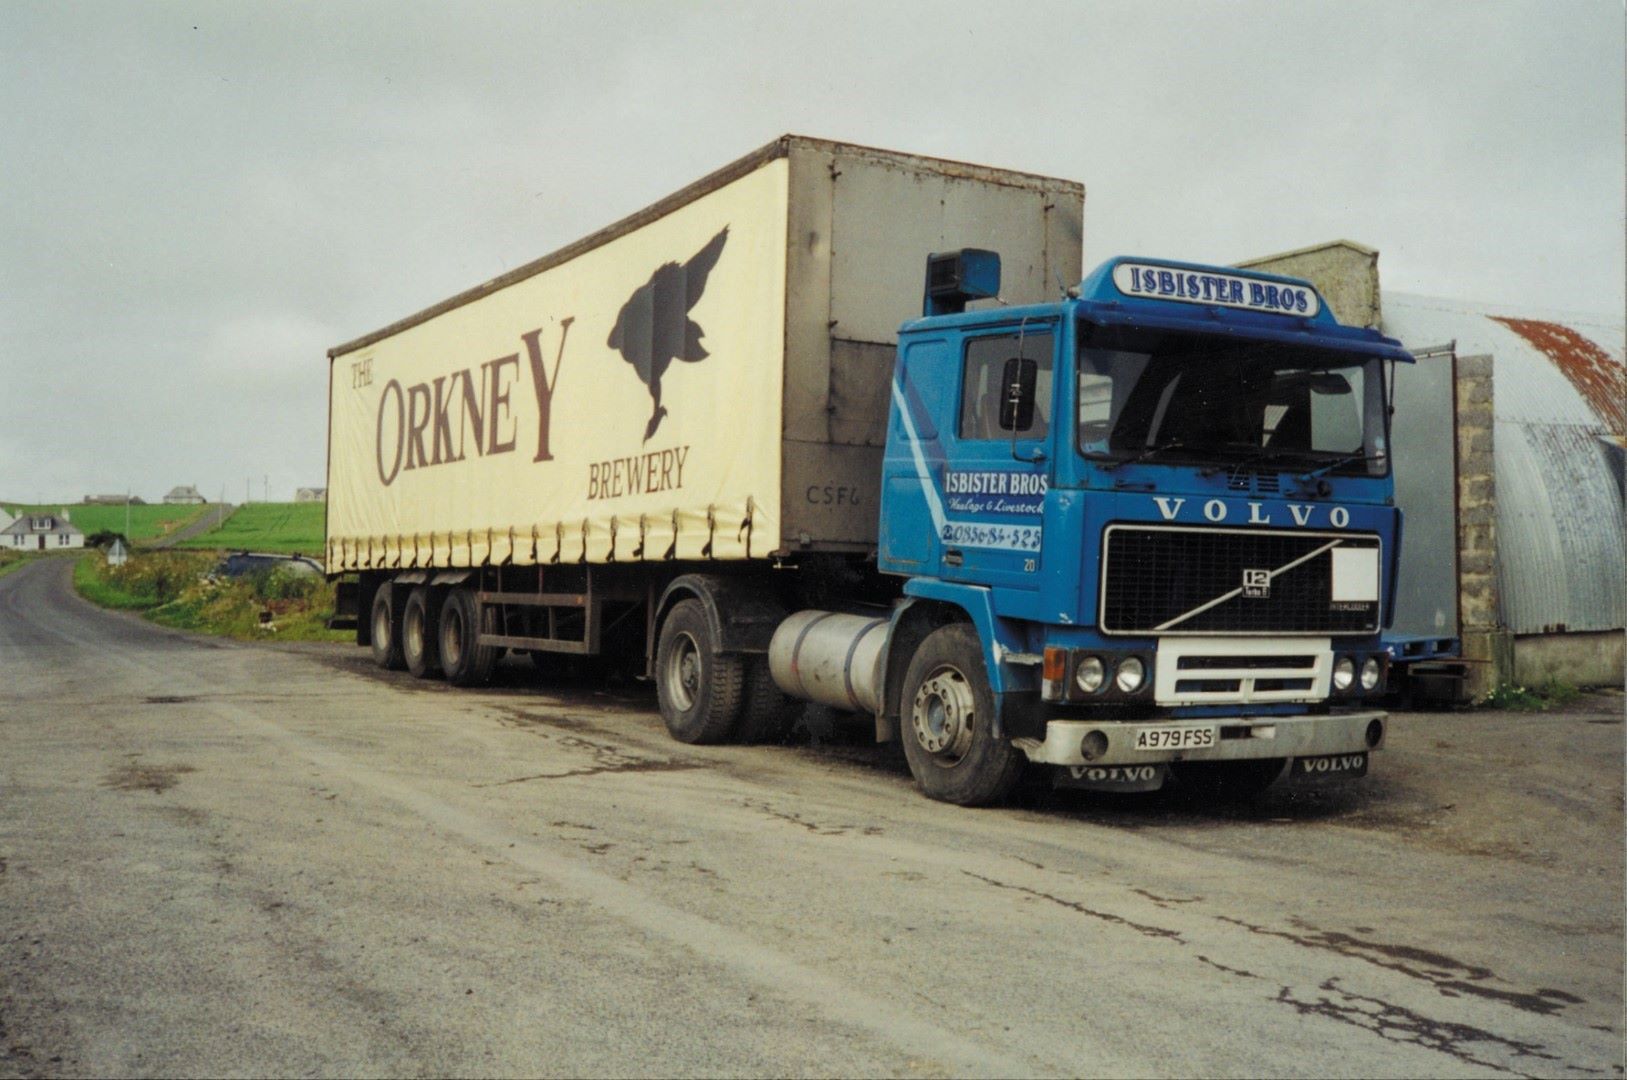 Volvo Orkney Brewery